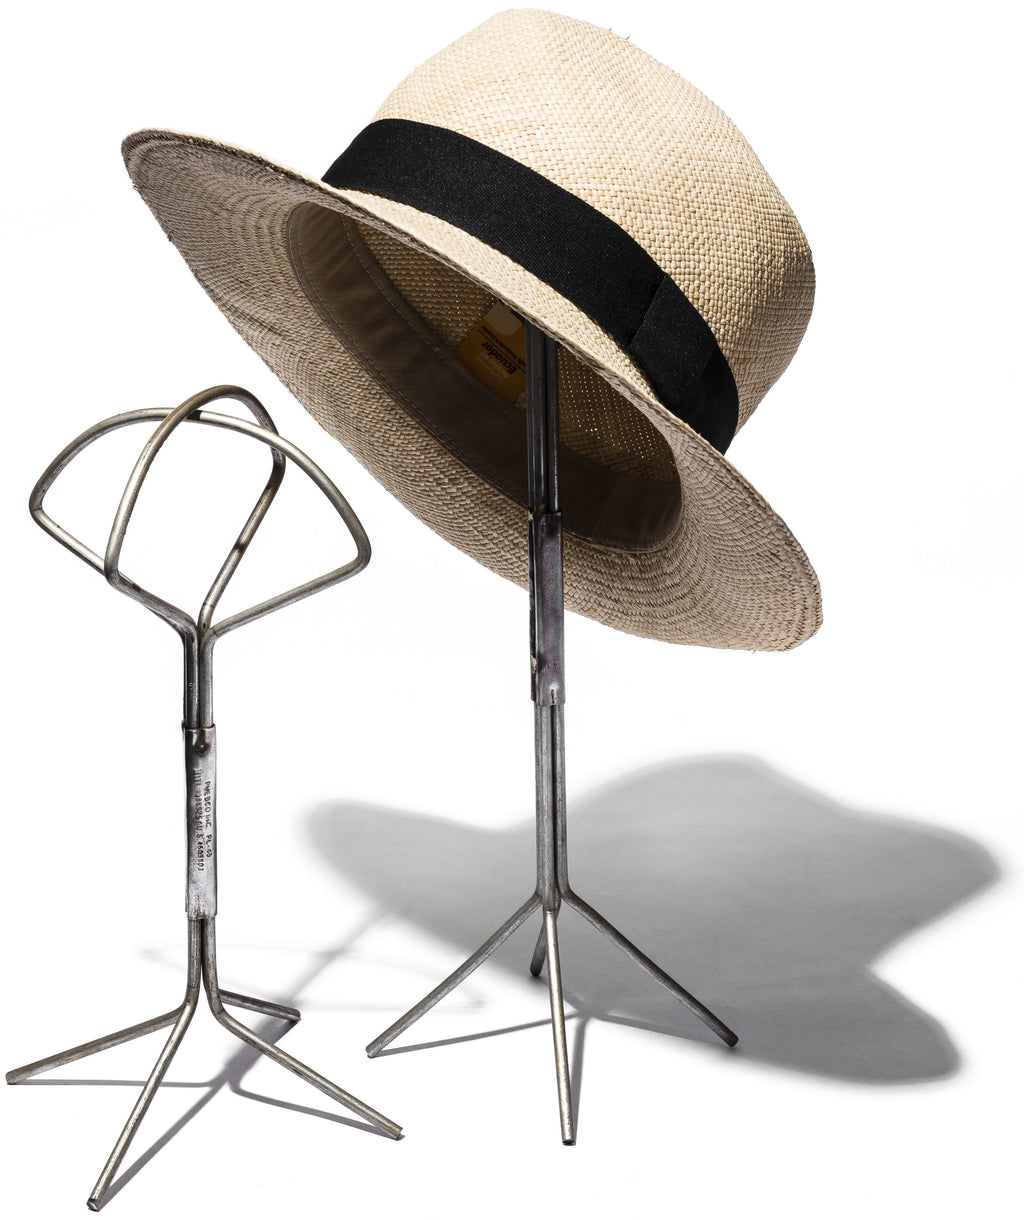 Folding Hat Stand - Large